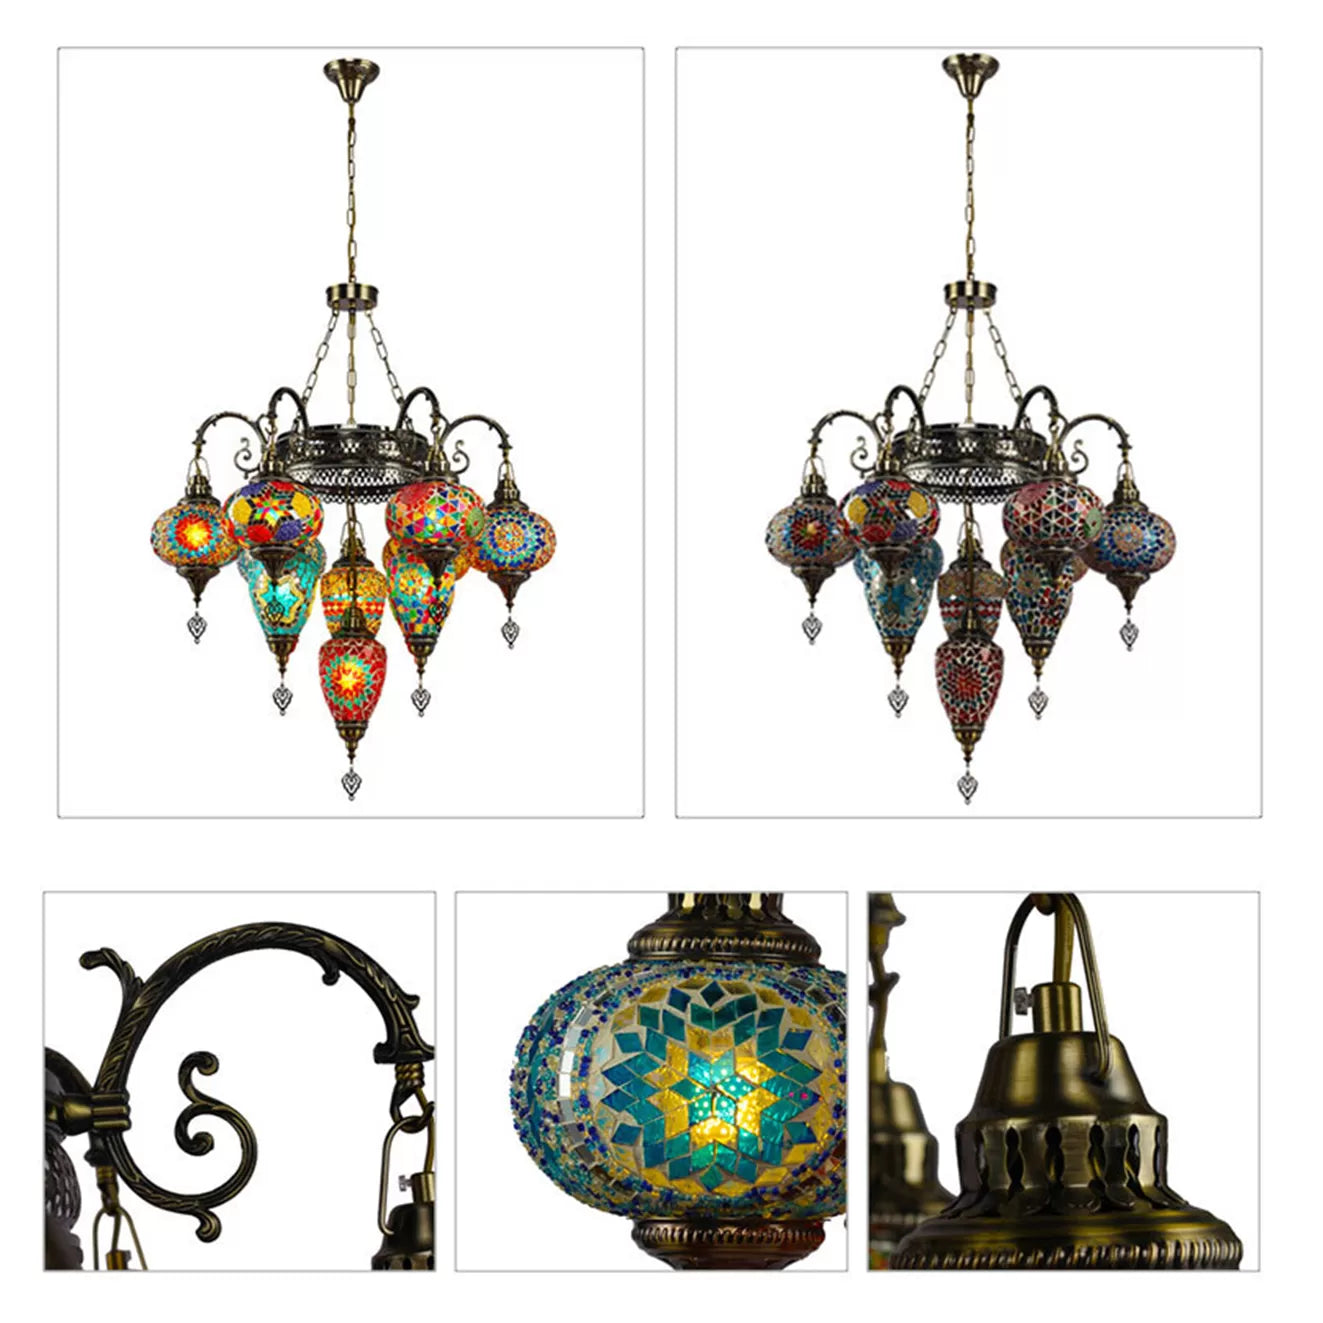 handmade-bohemian-style-ceiling-chandelier-Pandora-lamp-handcrafted-home-decor-multi-colour-beautiful-elegant-glass-metal-antique-large-for-landing-area-free-delivery